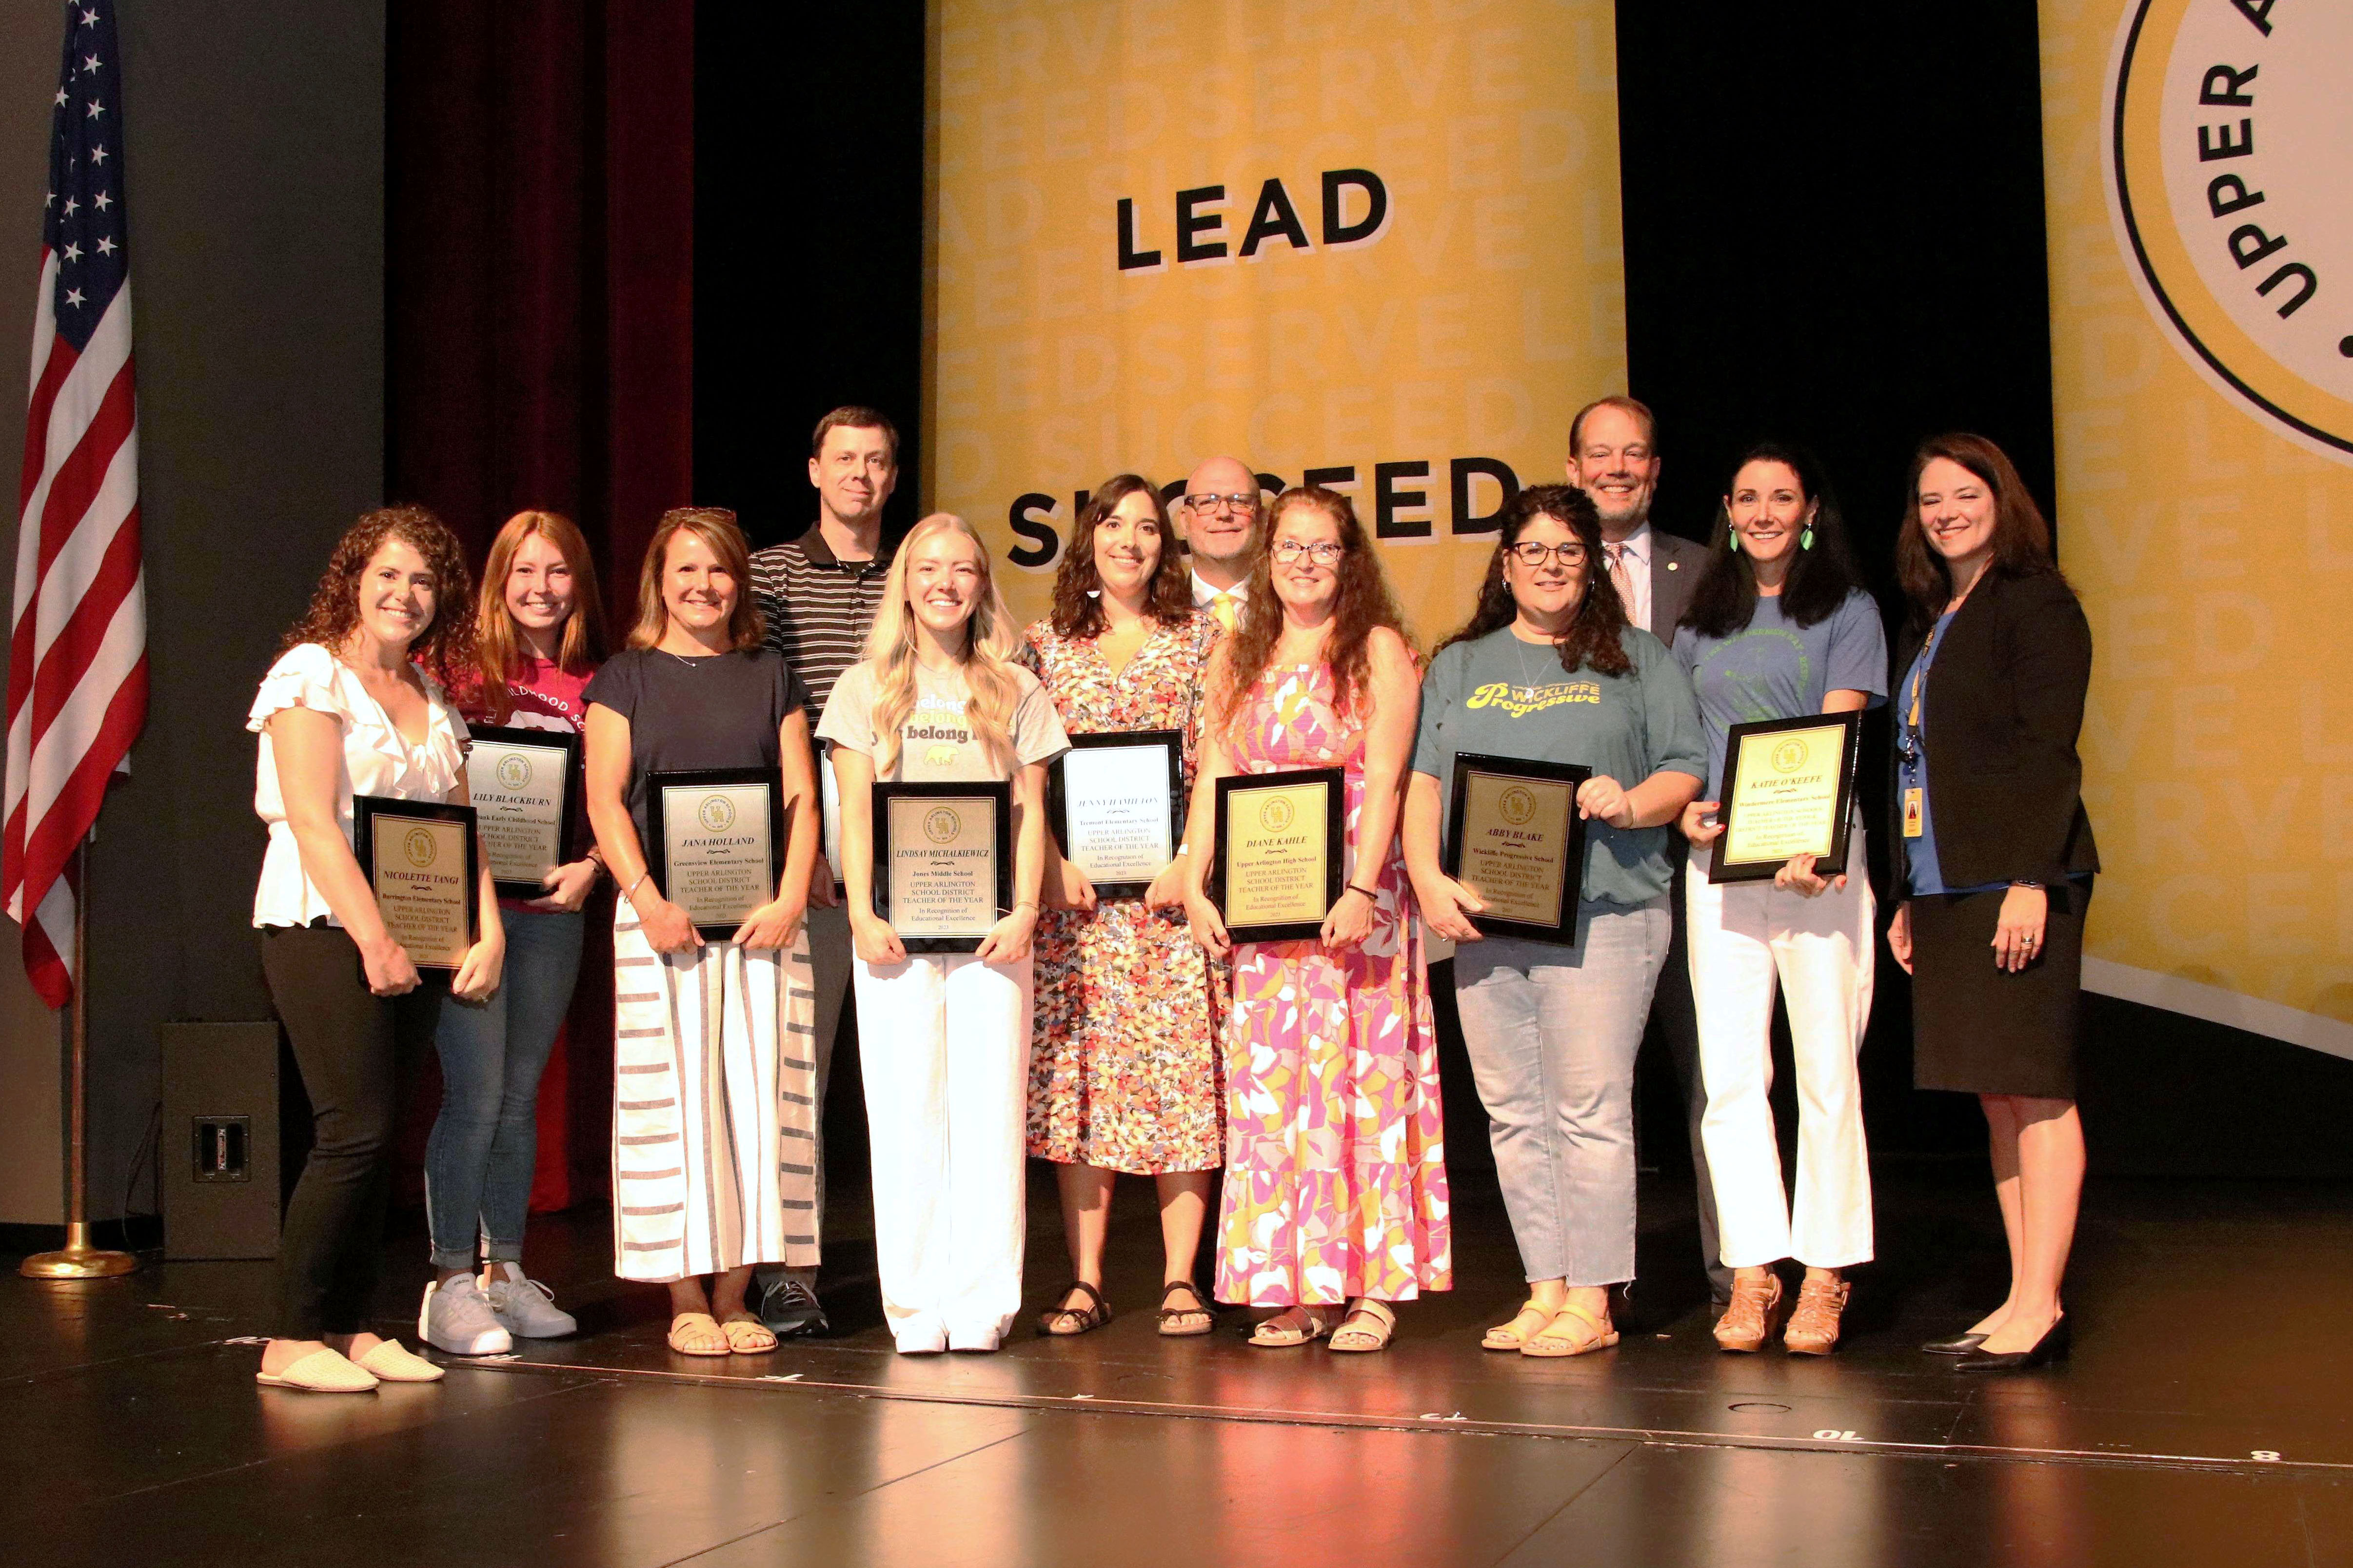 All of the teacher of the year recipients posing on stage with three administrators with gold banners in the background and an American flag off to the left side of the photo